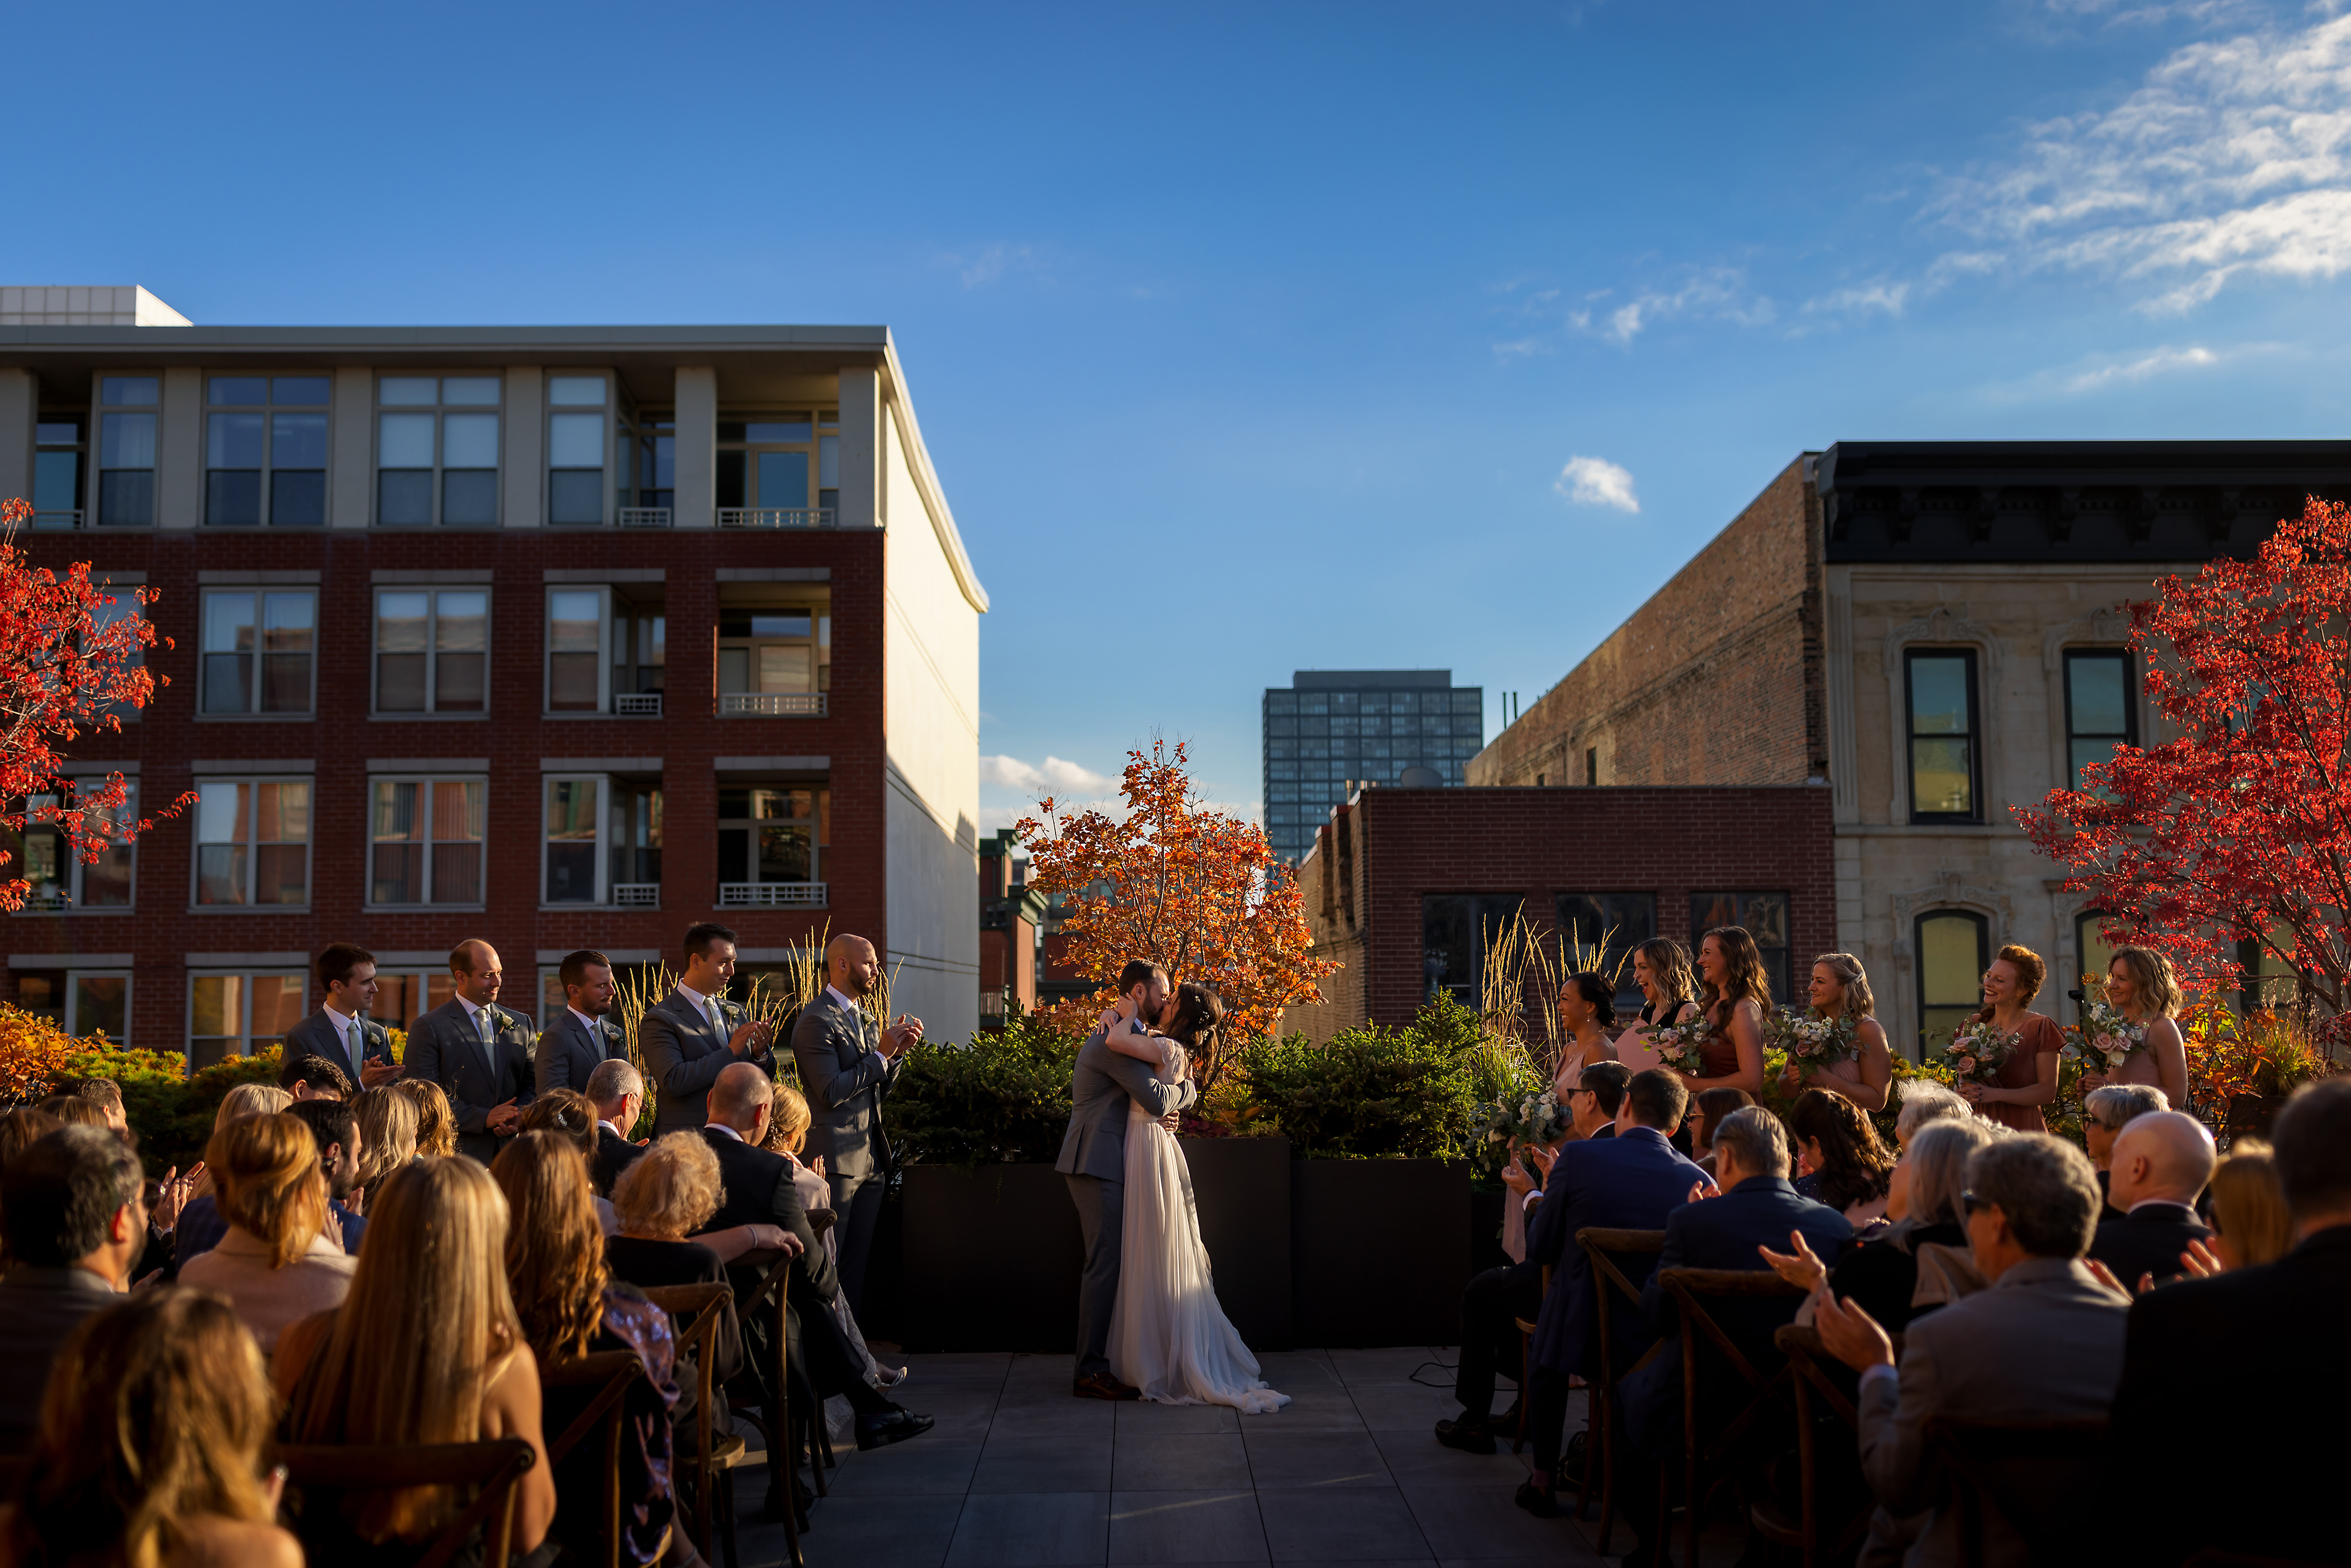 Bride and groom kiss at the end of rooftop wedding ceremony at Loft Lucia in Chicago's West Loop neighborhood.